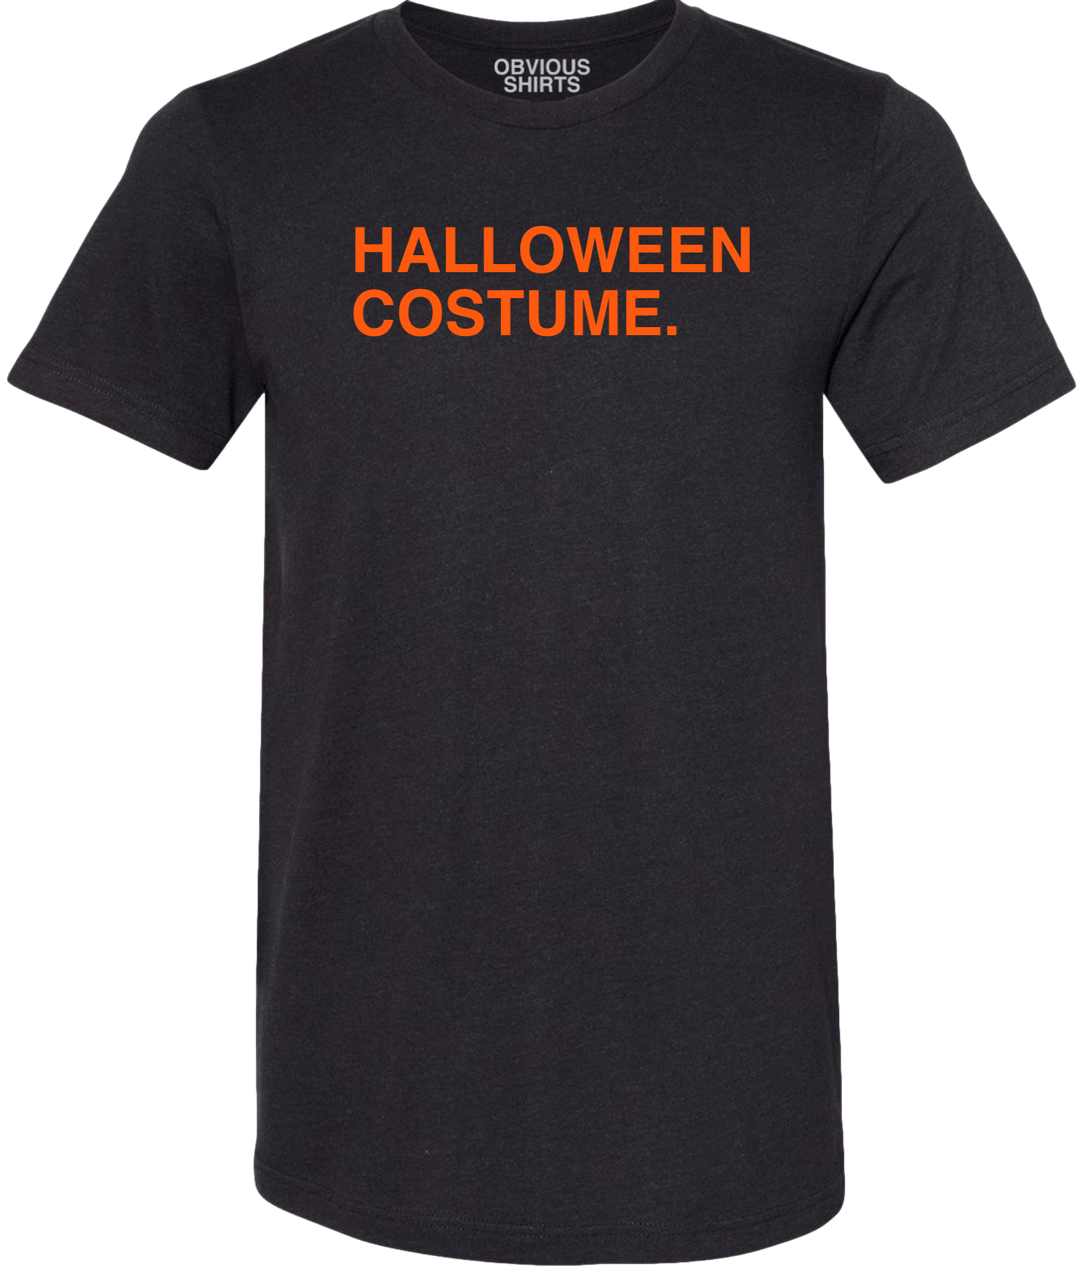 HALLOWEEN COSTUME. - OBVIOUS SHIRTS